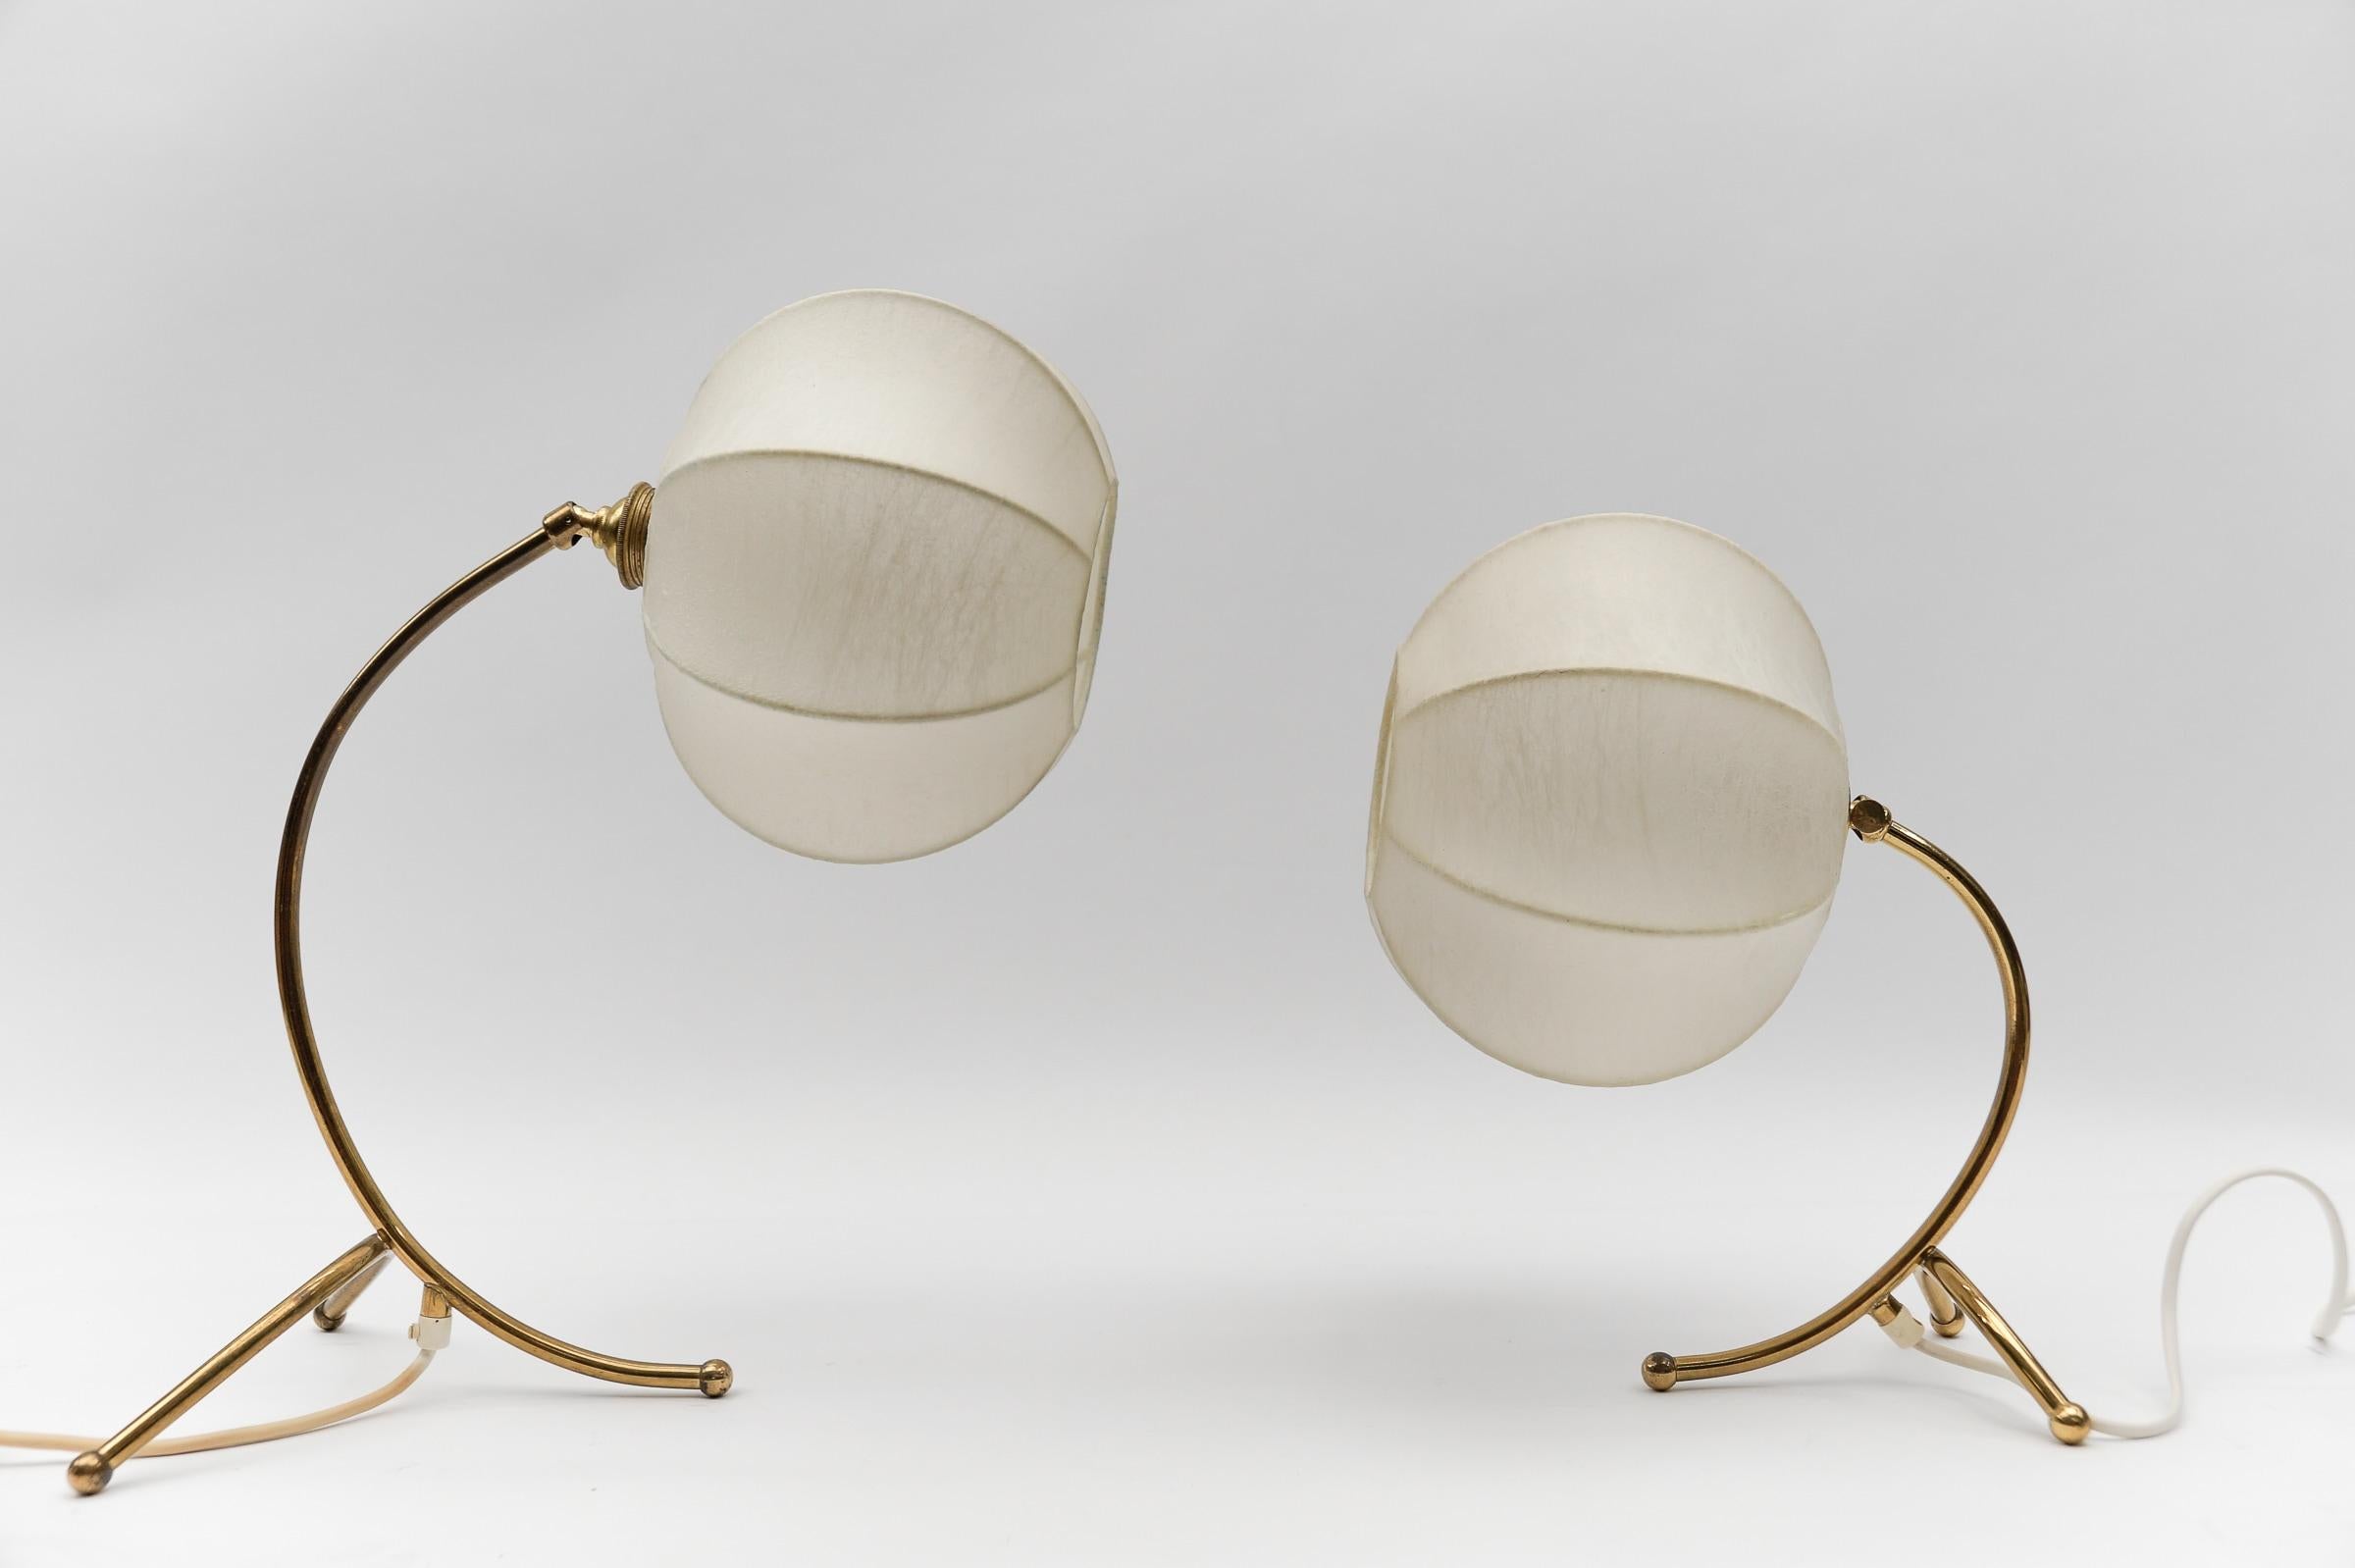 German Pair of Mid-Century Modern Brass and Cocoon Tripod Table Lamps, 1950s